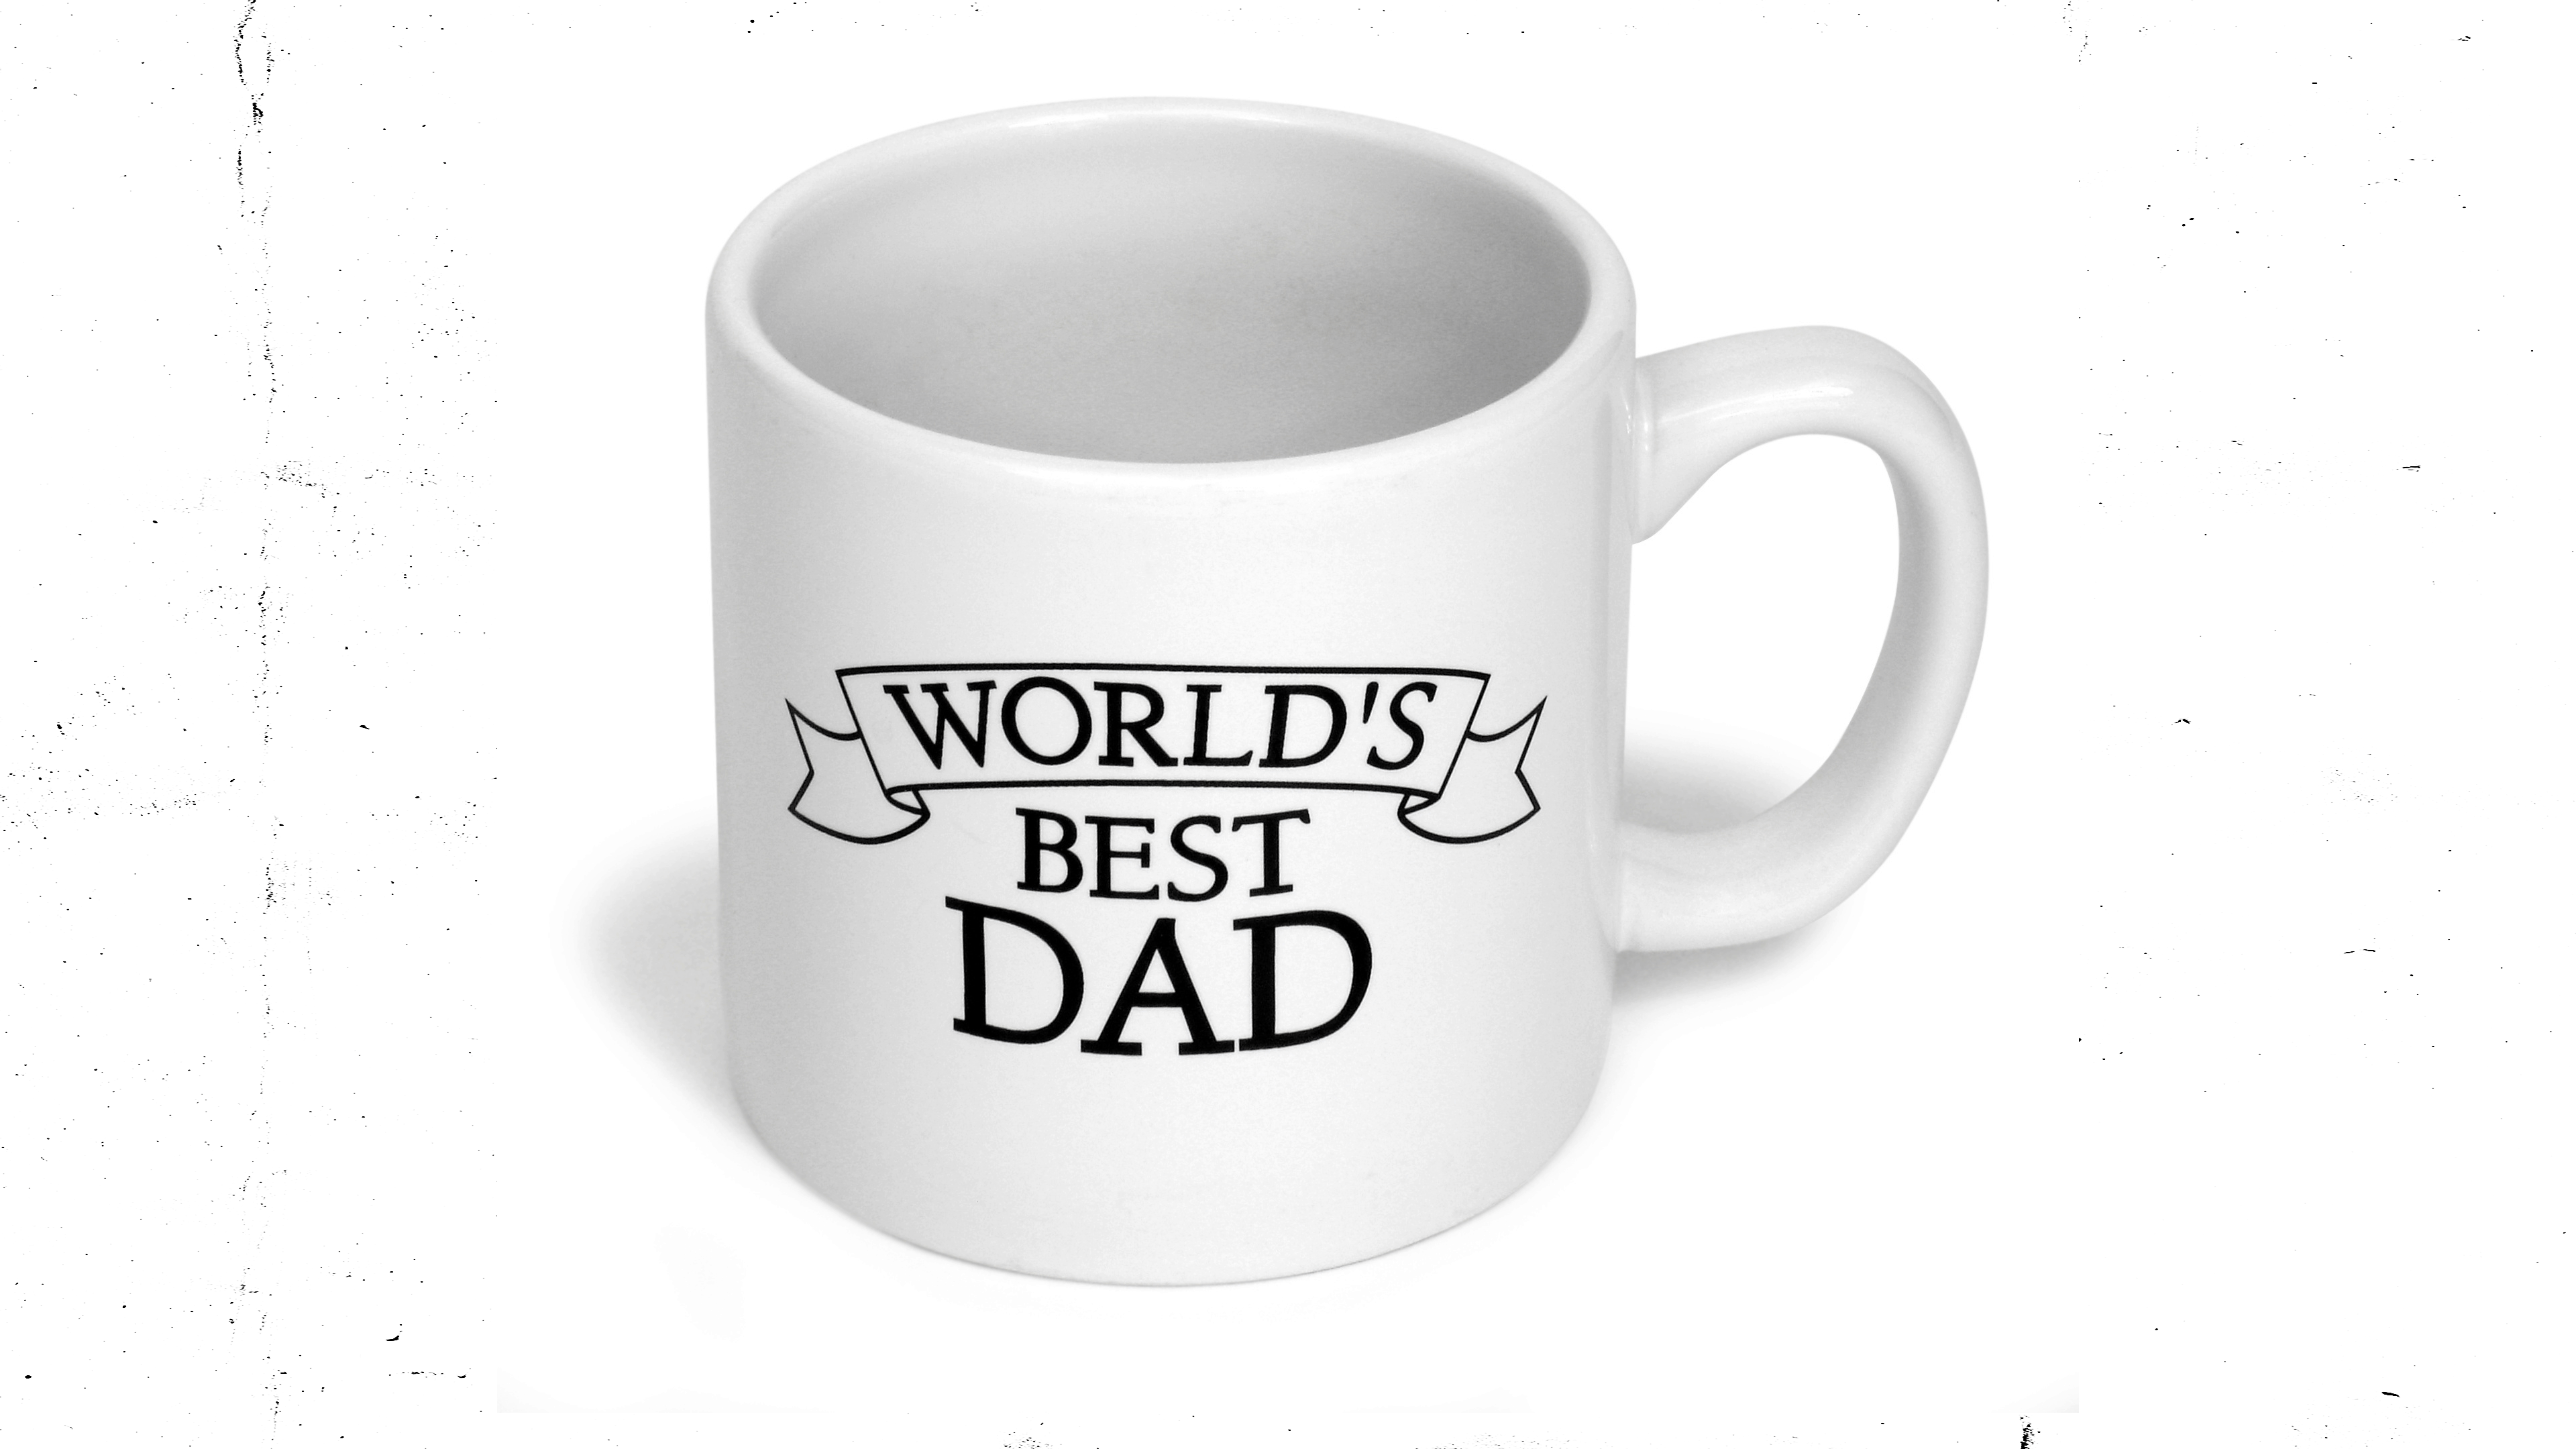 Featured image for “Father’s Day”